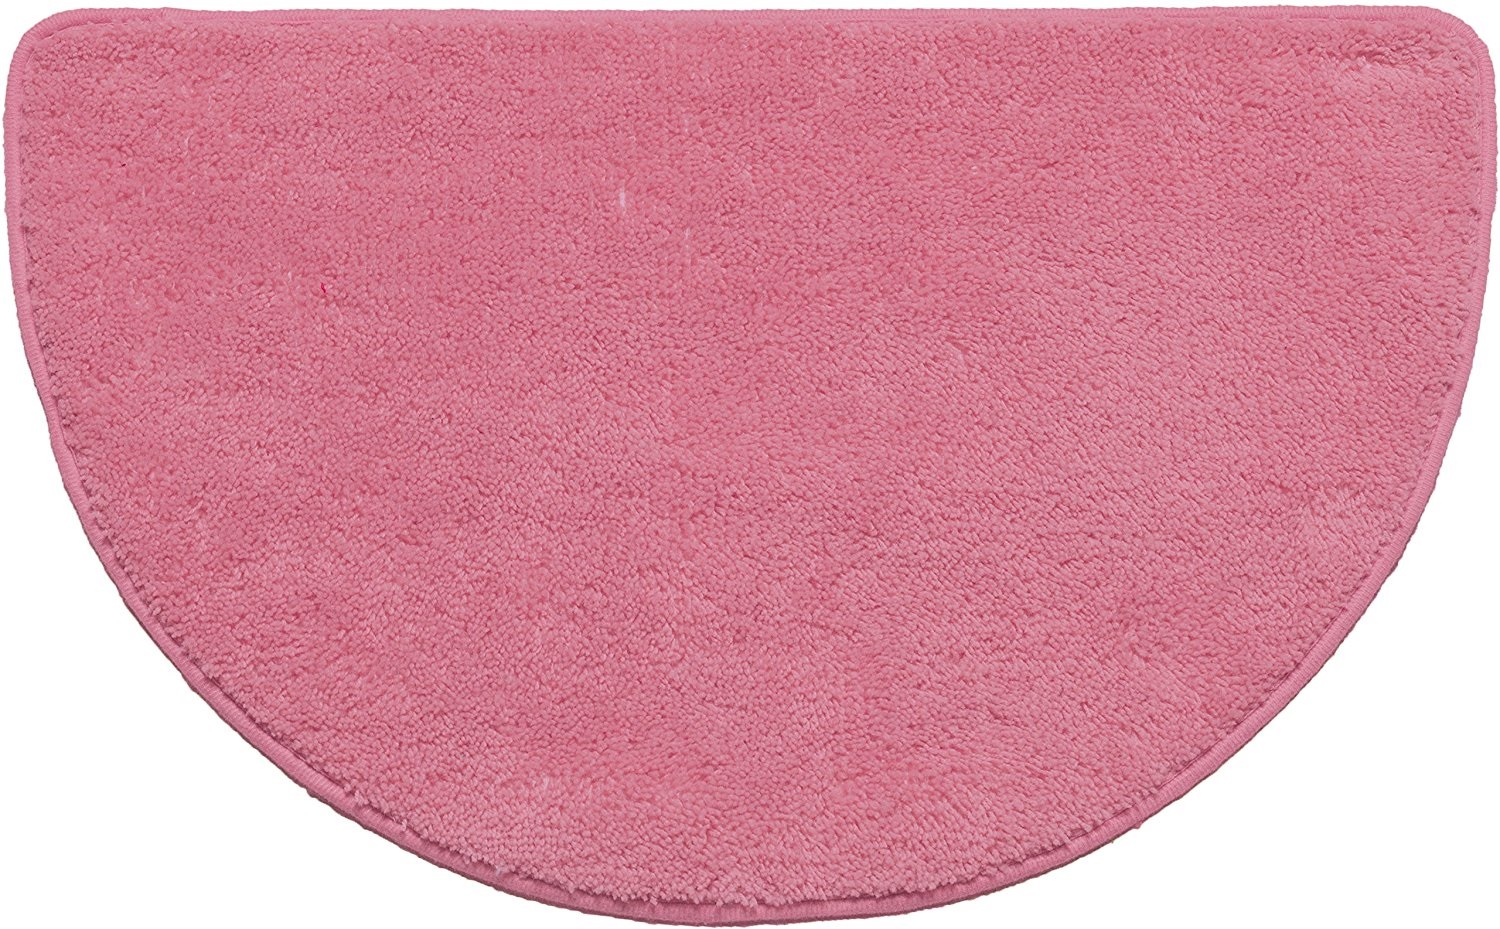 Rs024892 18 X 30 In. Hailey Slice Rug, Rose